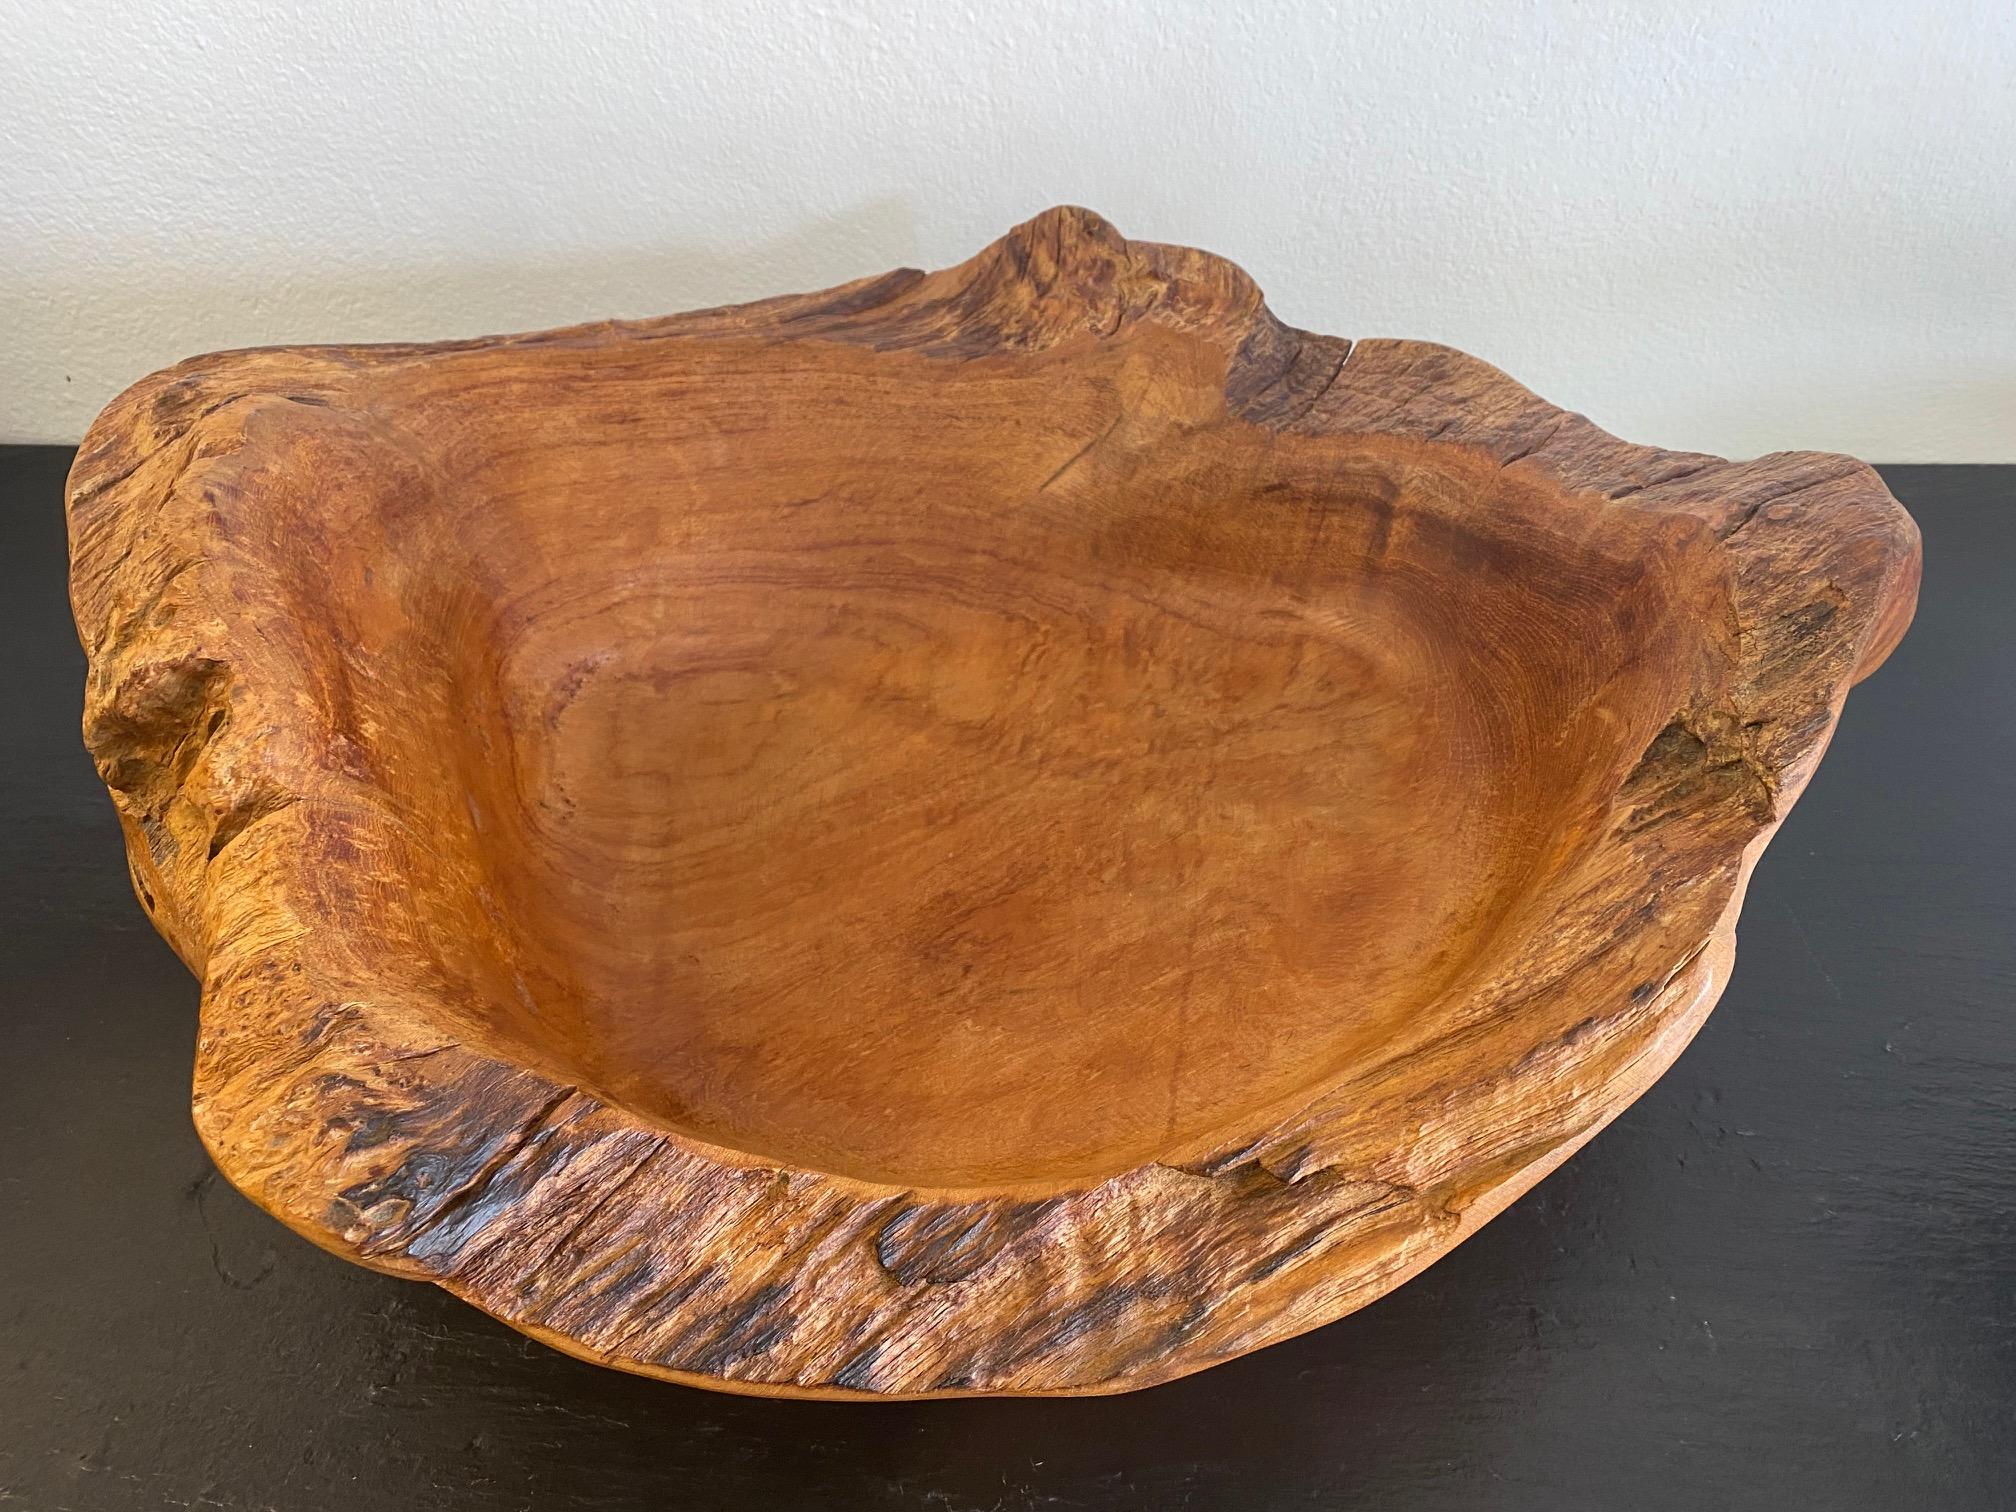 Large hand craved wood bowl with natural edges
See photo with soda can to get a sense of scale.